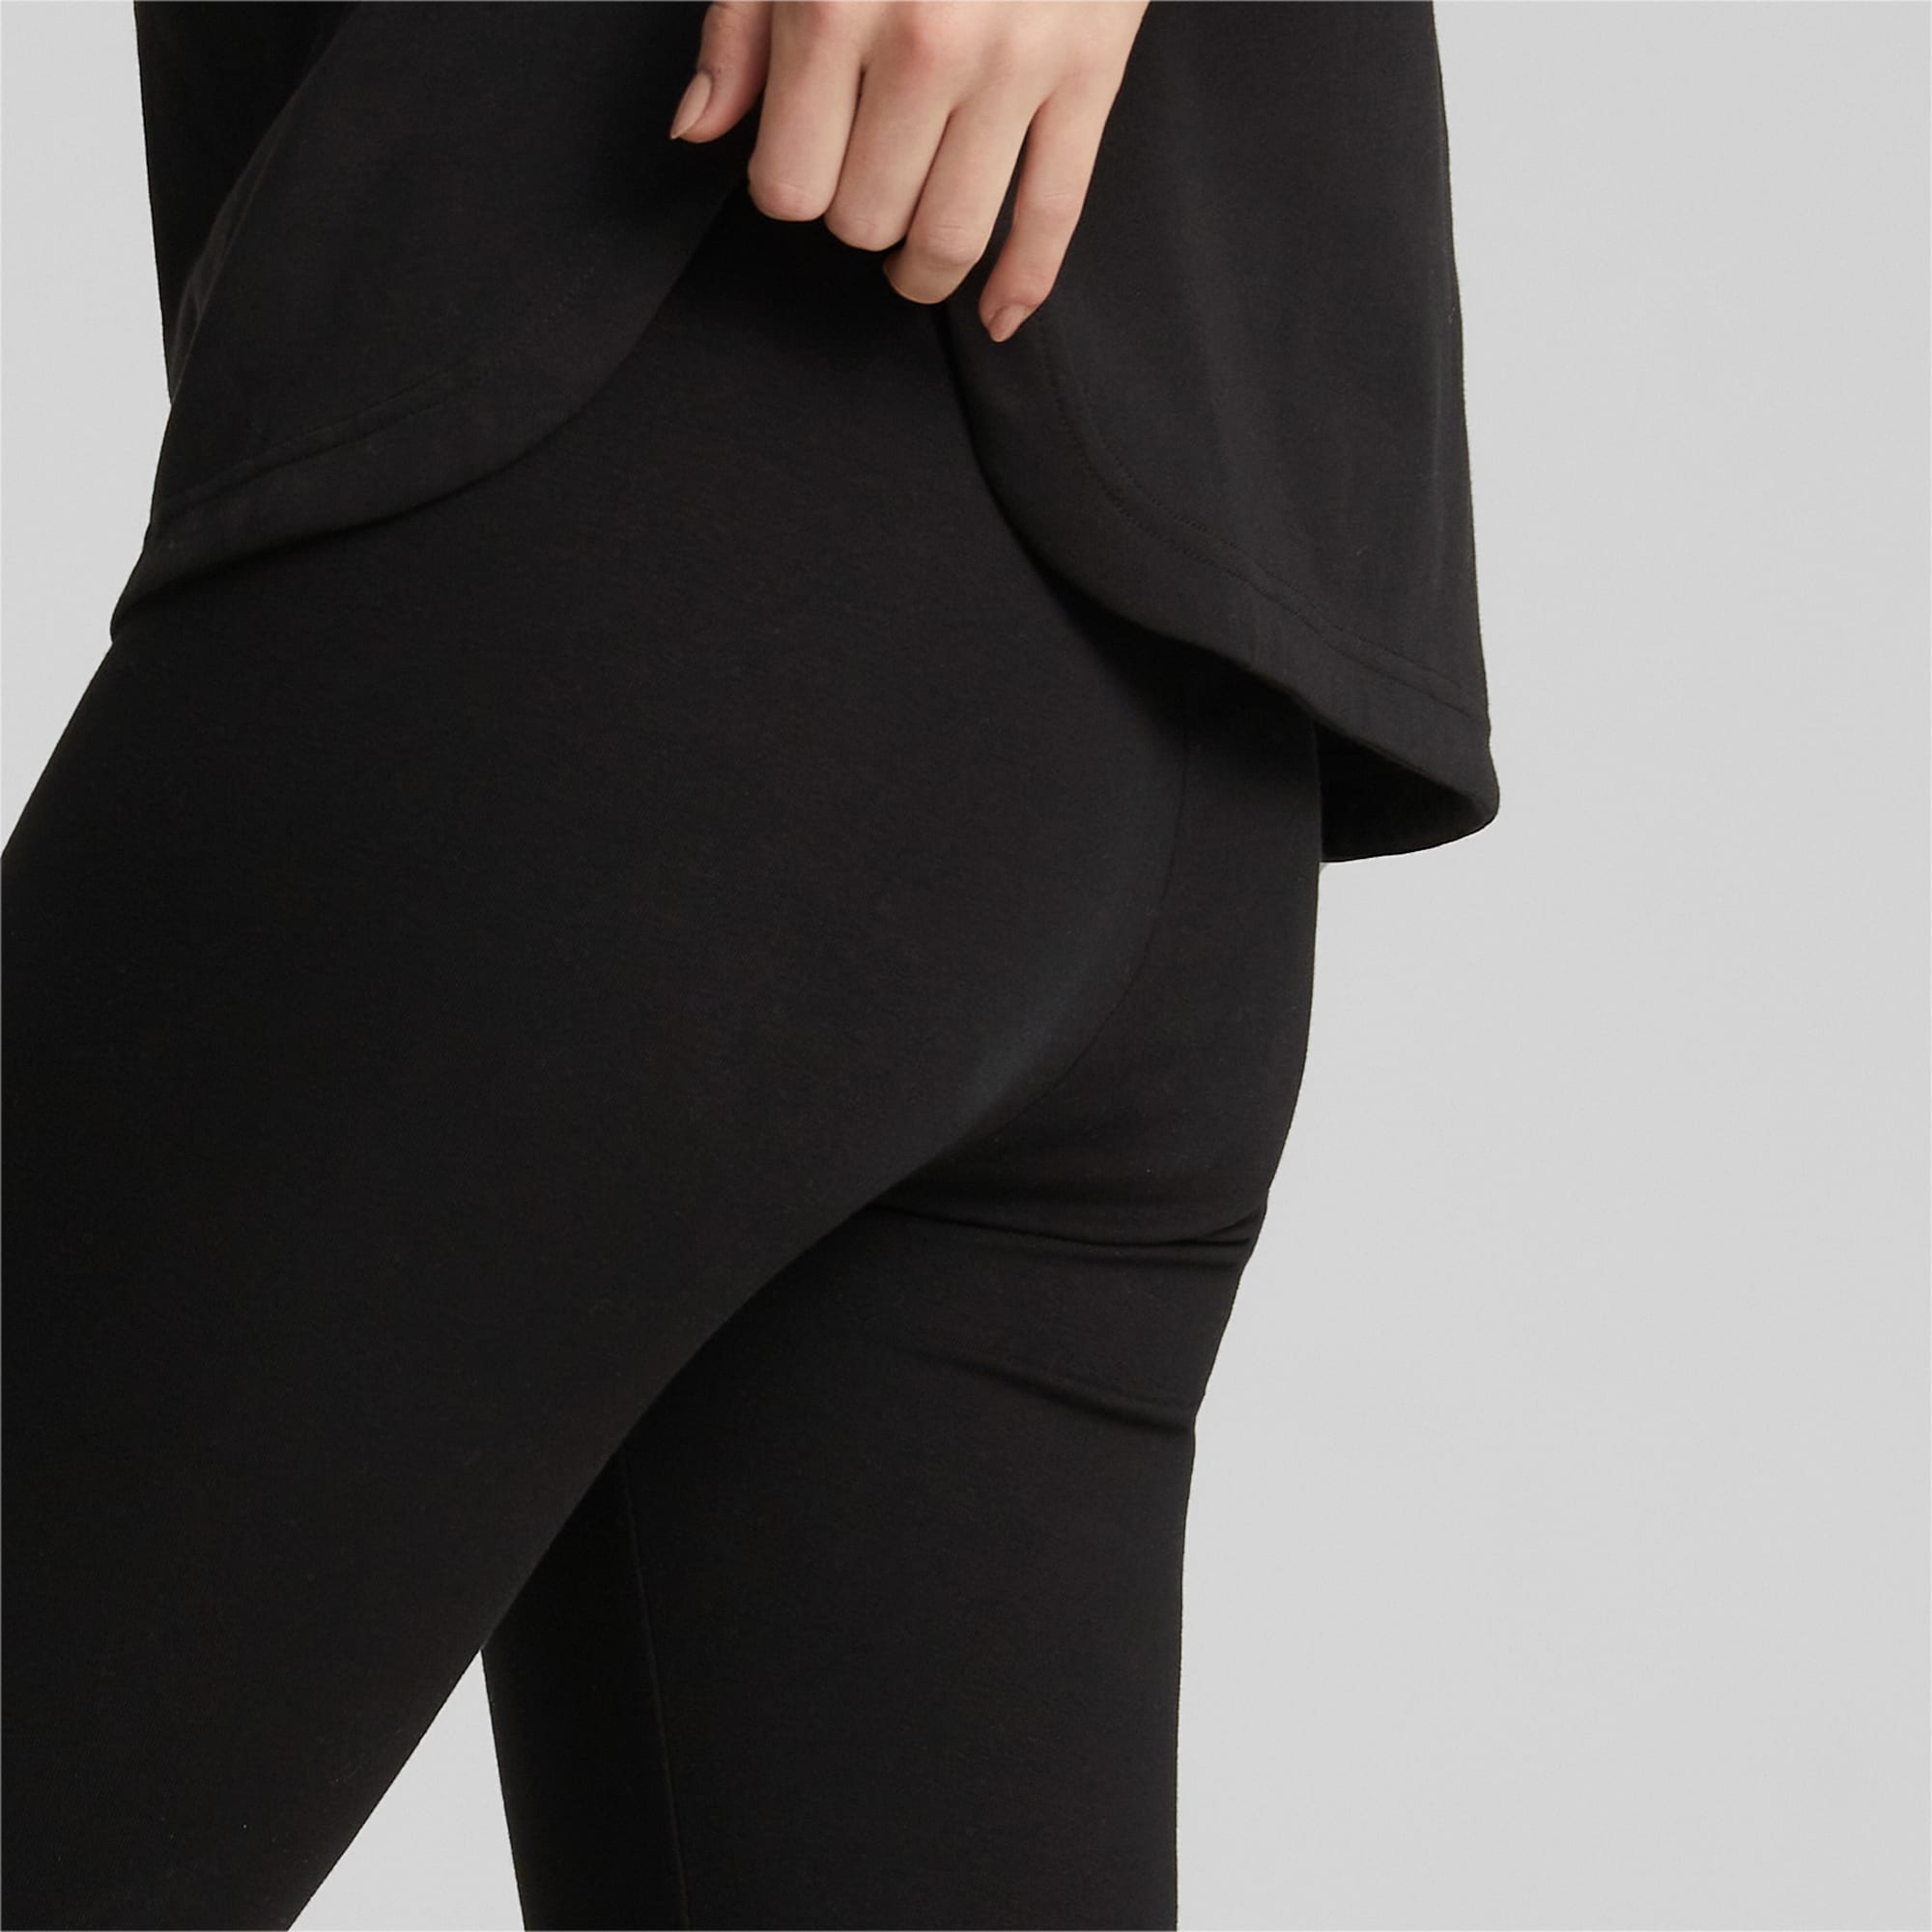 Jupiter Gear Black High-Waisted Classic Gym Leggings with Side